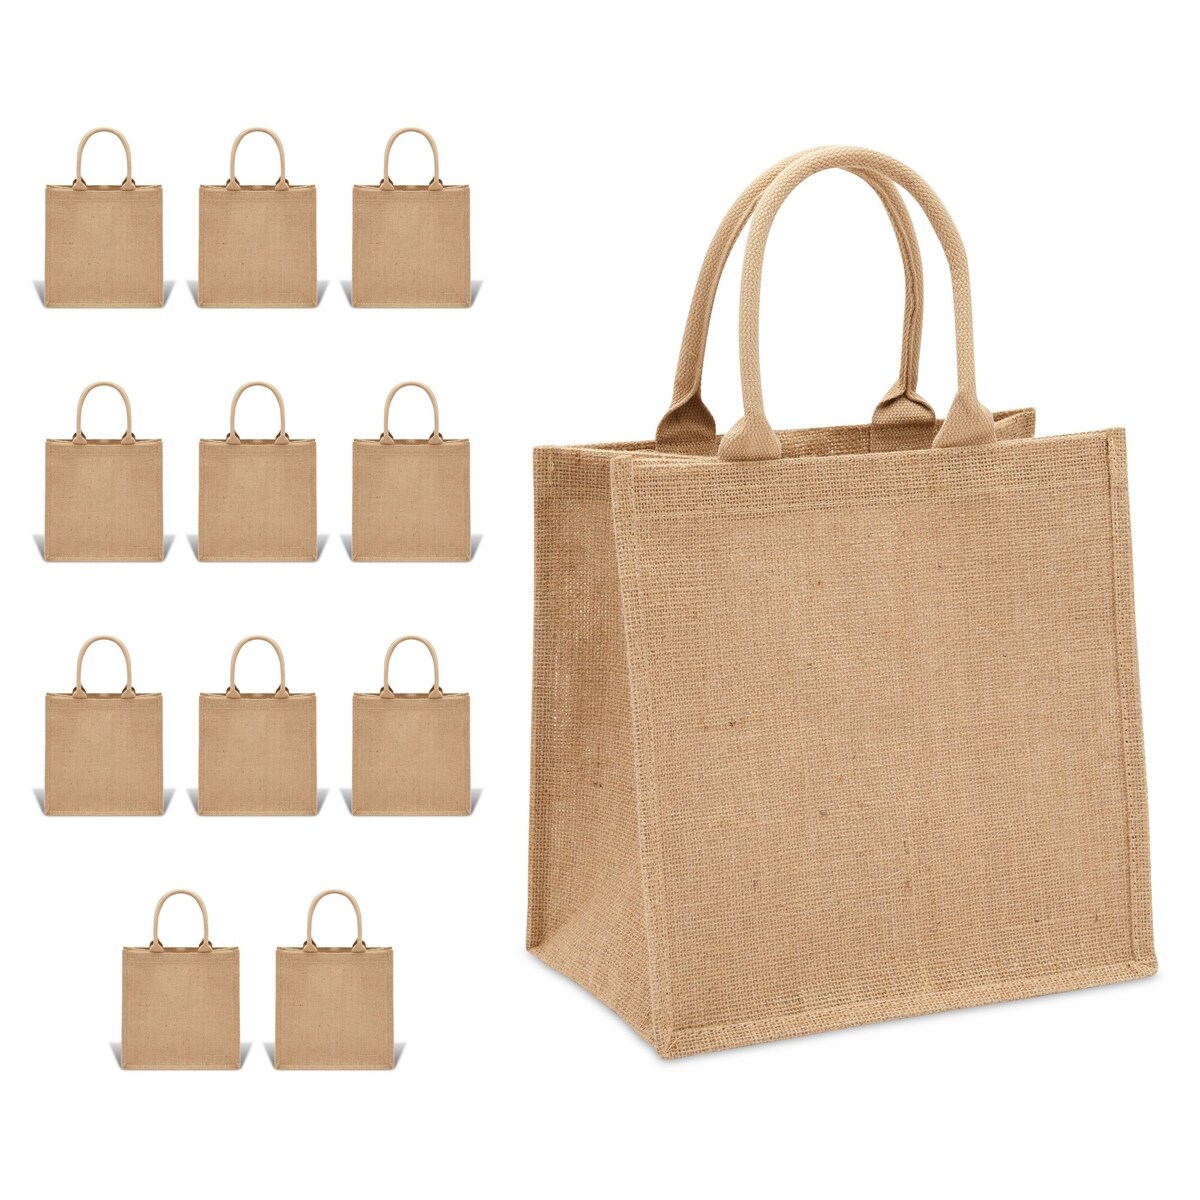 Shop Online 100% Biodegradable Jute Tote Bags| Best of Signs